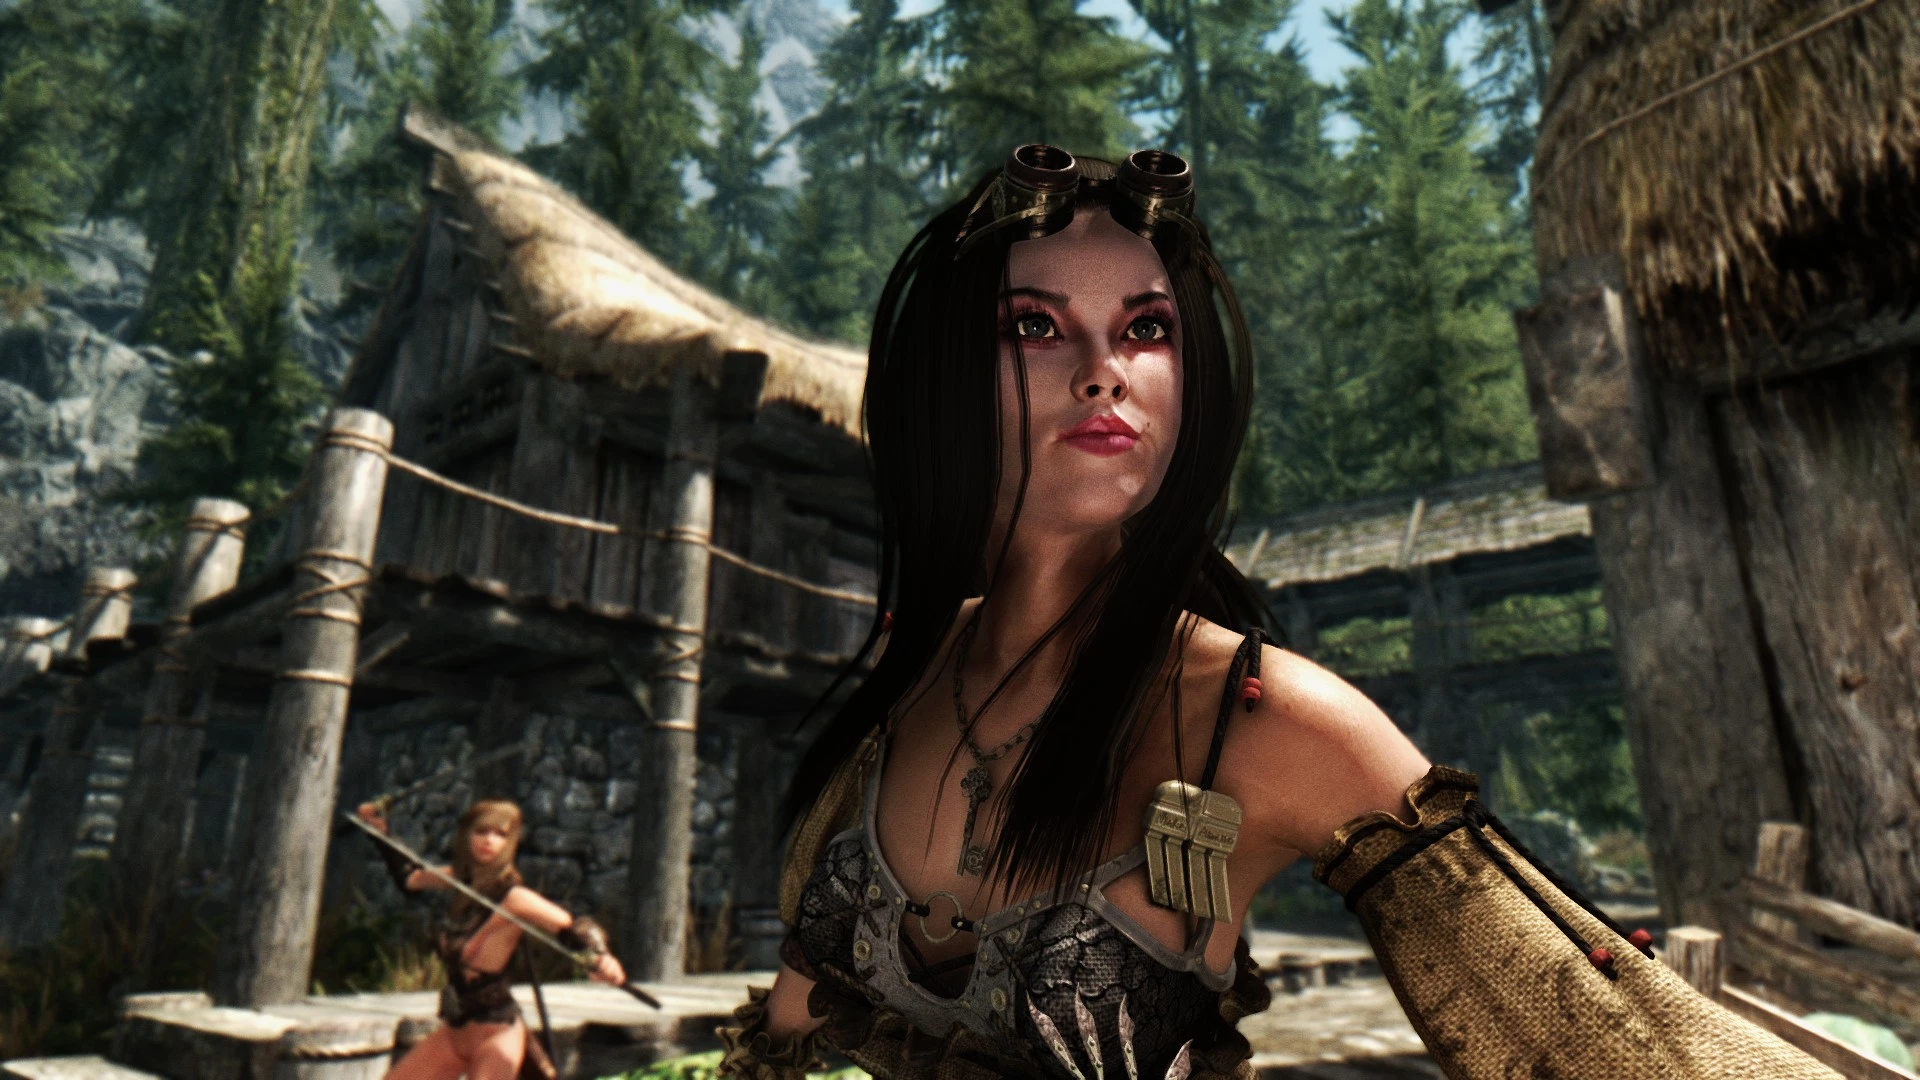 Killers Realistic Skin Sss Patch For Enb At Skyrim Nexus Free Nude